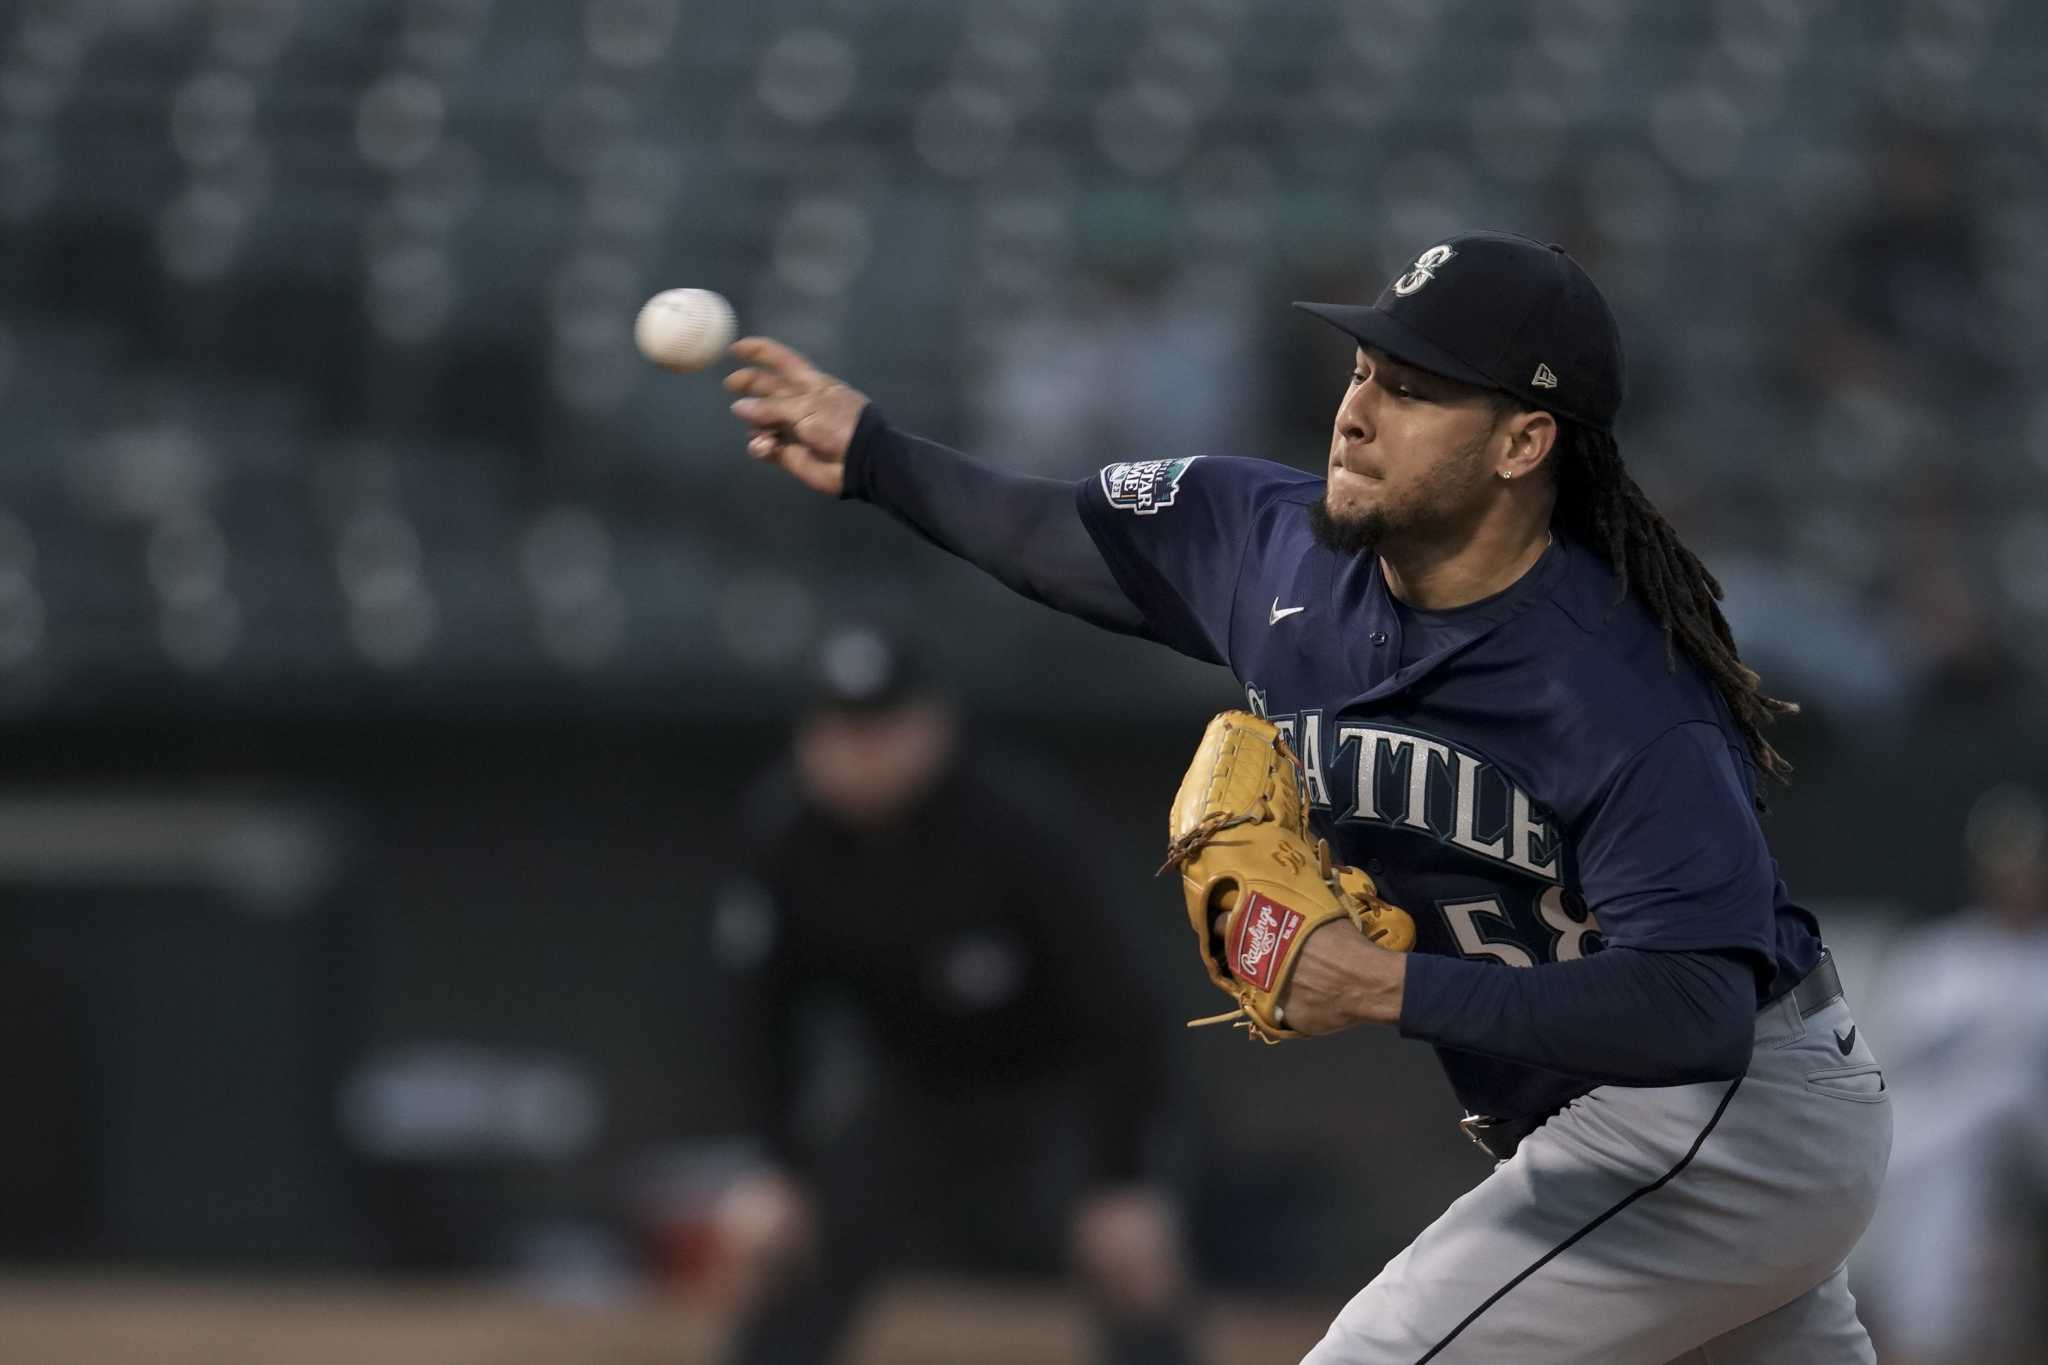 3 Up, 3 Down: Cal Raleigh Brings It Around Town as Seattle